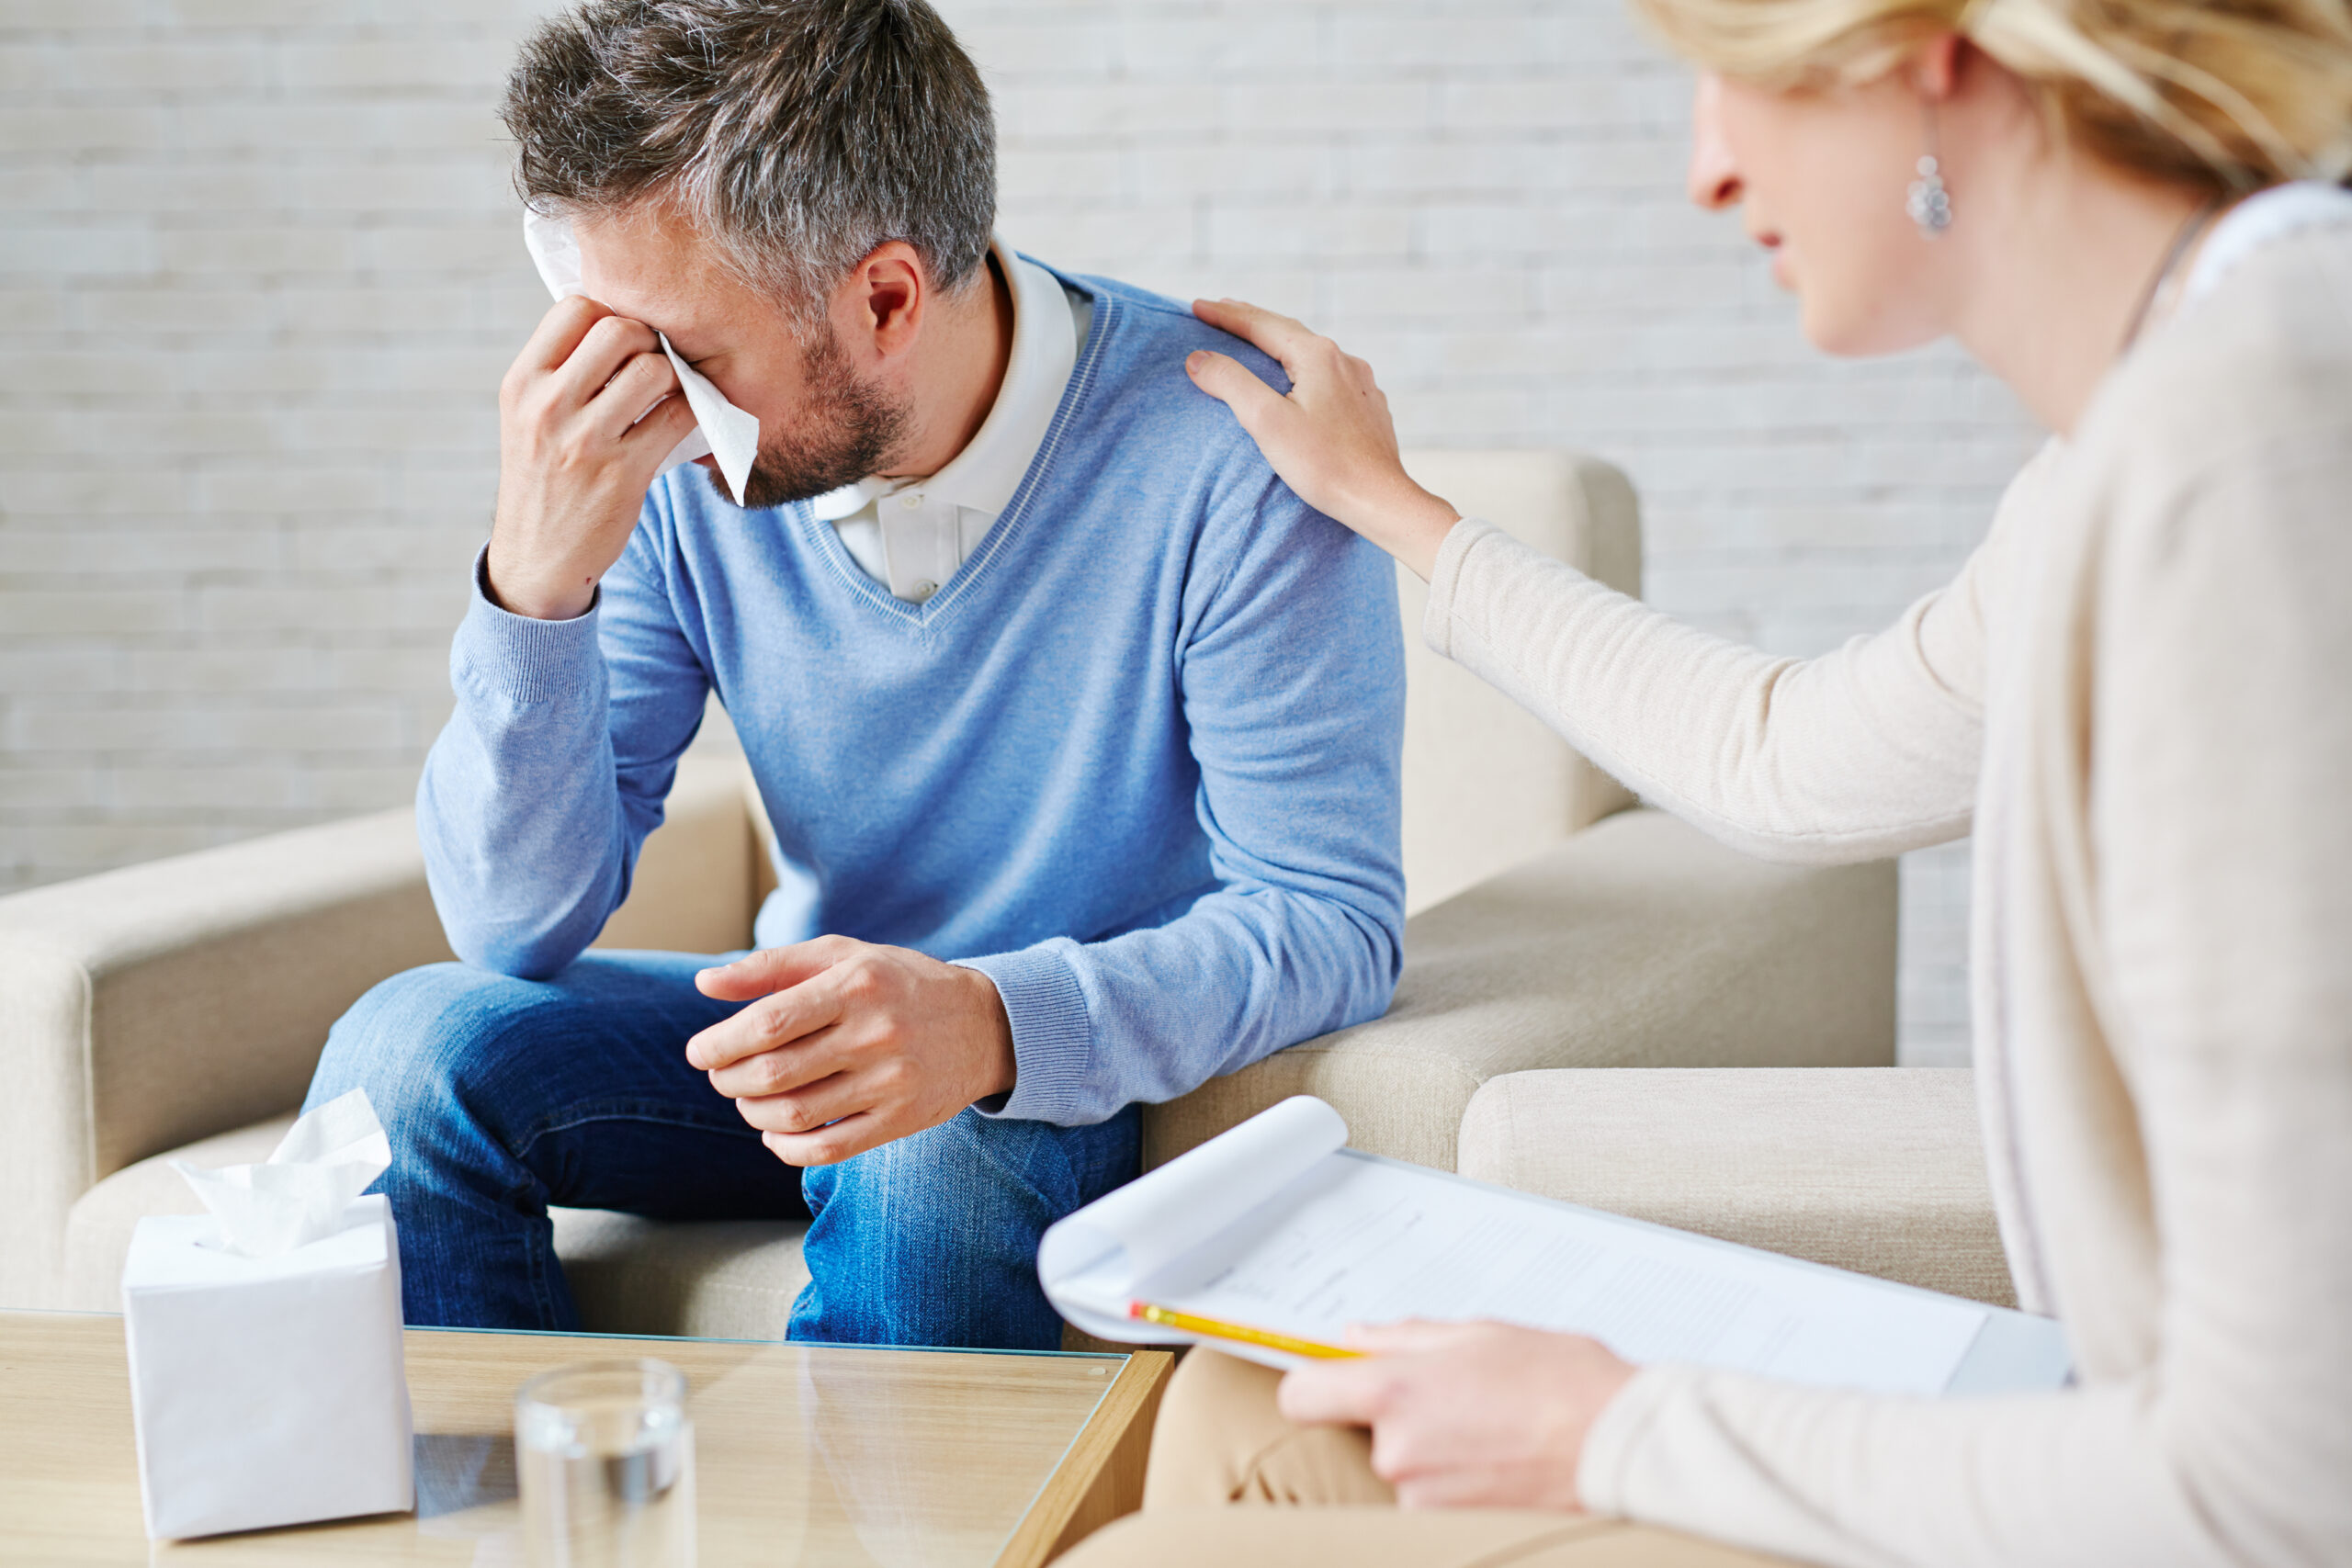 Divorce Trauma and PTSD…What to know.